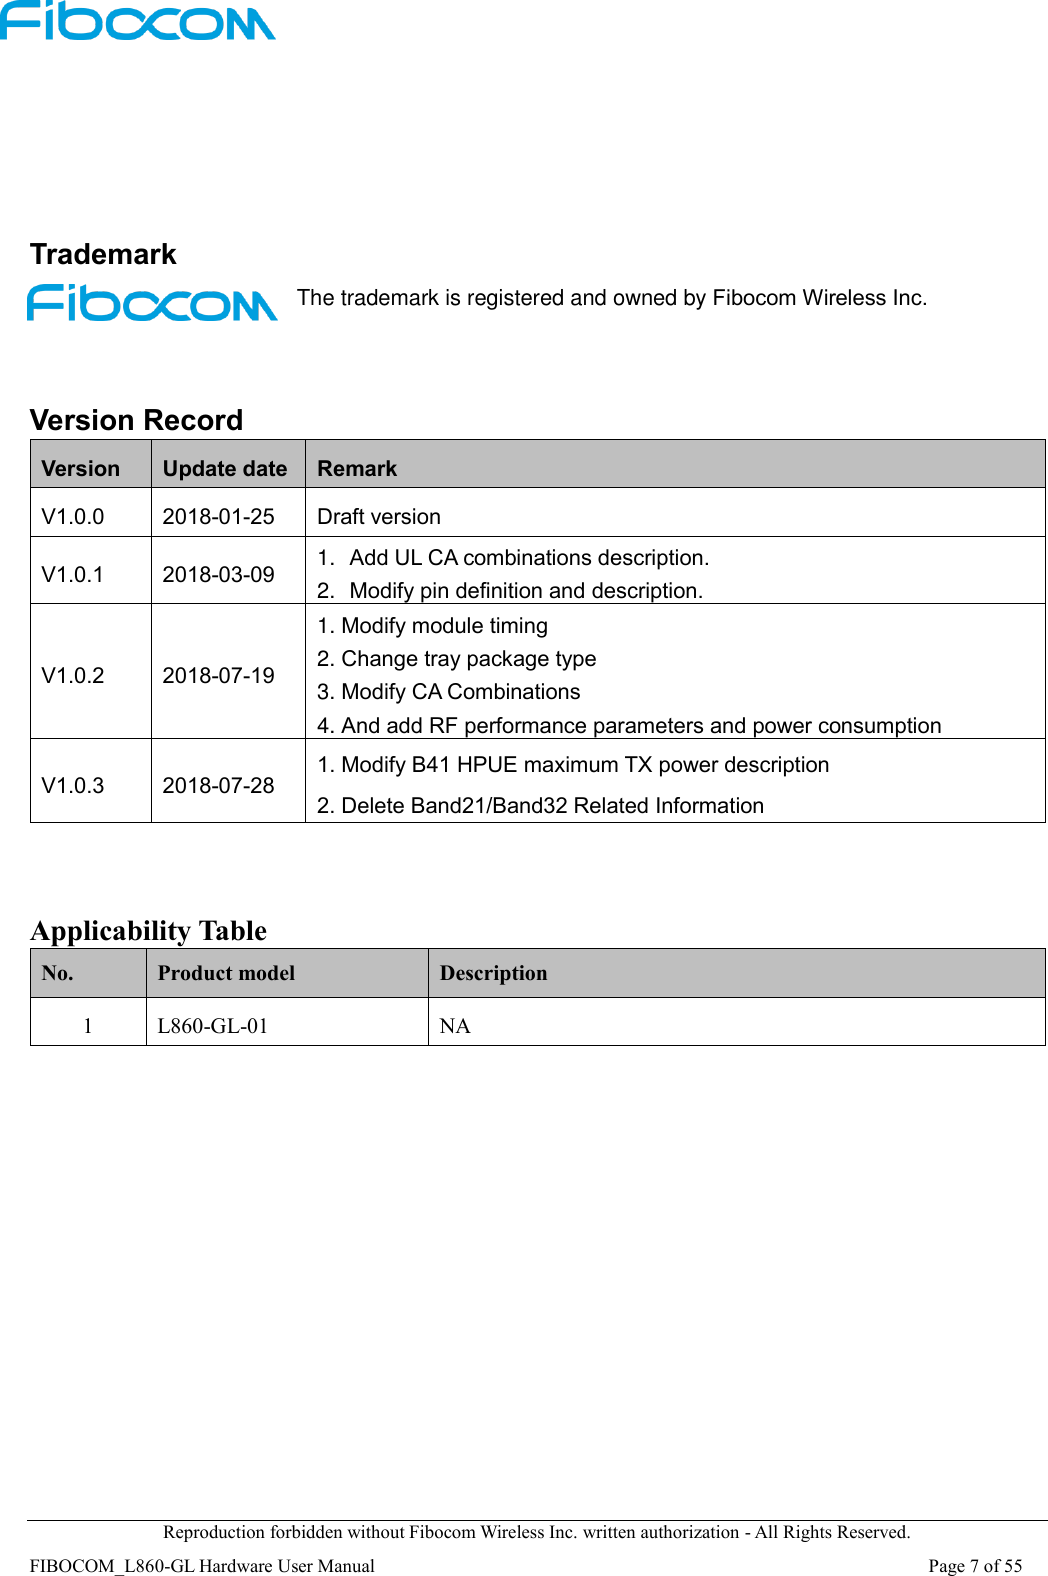  Reproduction forbidden without Fibocom Wireless Inc. written authorization - All Rights Reserved. FIBOCOM_L860-GL Hardware User Manual                                                                                                                      Page 7 of 55     Trademark The trademark is registered and owned by Fibocom Wireless Inc.   Version Record Version Update date Remark V1.0.0 2018-01-25 Draft version V1.0.1 2018-03-09 1. Add UL CA combinations description. 2. Modify pin definition and description. V1.0.2 2018-07-19 1. Modify module timing 2. Change tray package type 3. Modify CA Combinations   4. And add RF performance parameters and power consumption V1.0.3 2018-07-28 1. Modify B41 HPUE maximum TX power description 2. Delete Band21/Band32 Related Information   Applicability Table No. Product model Description 1 L860-GL-01 NA           